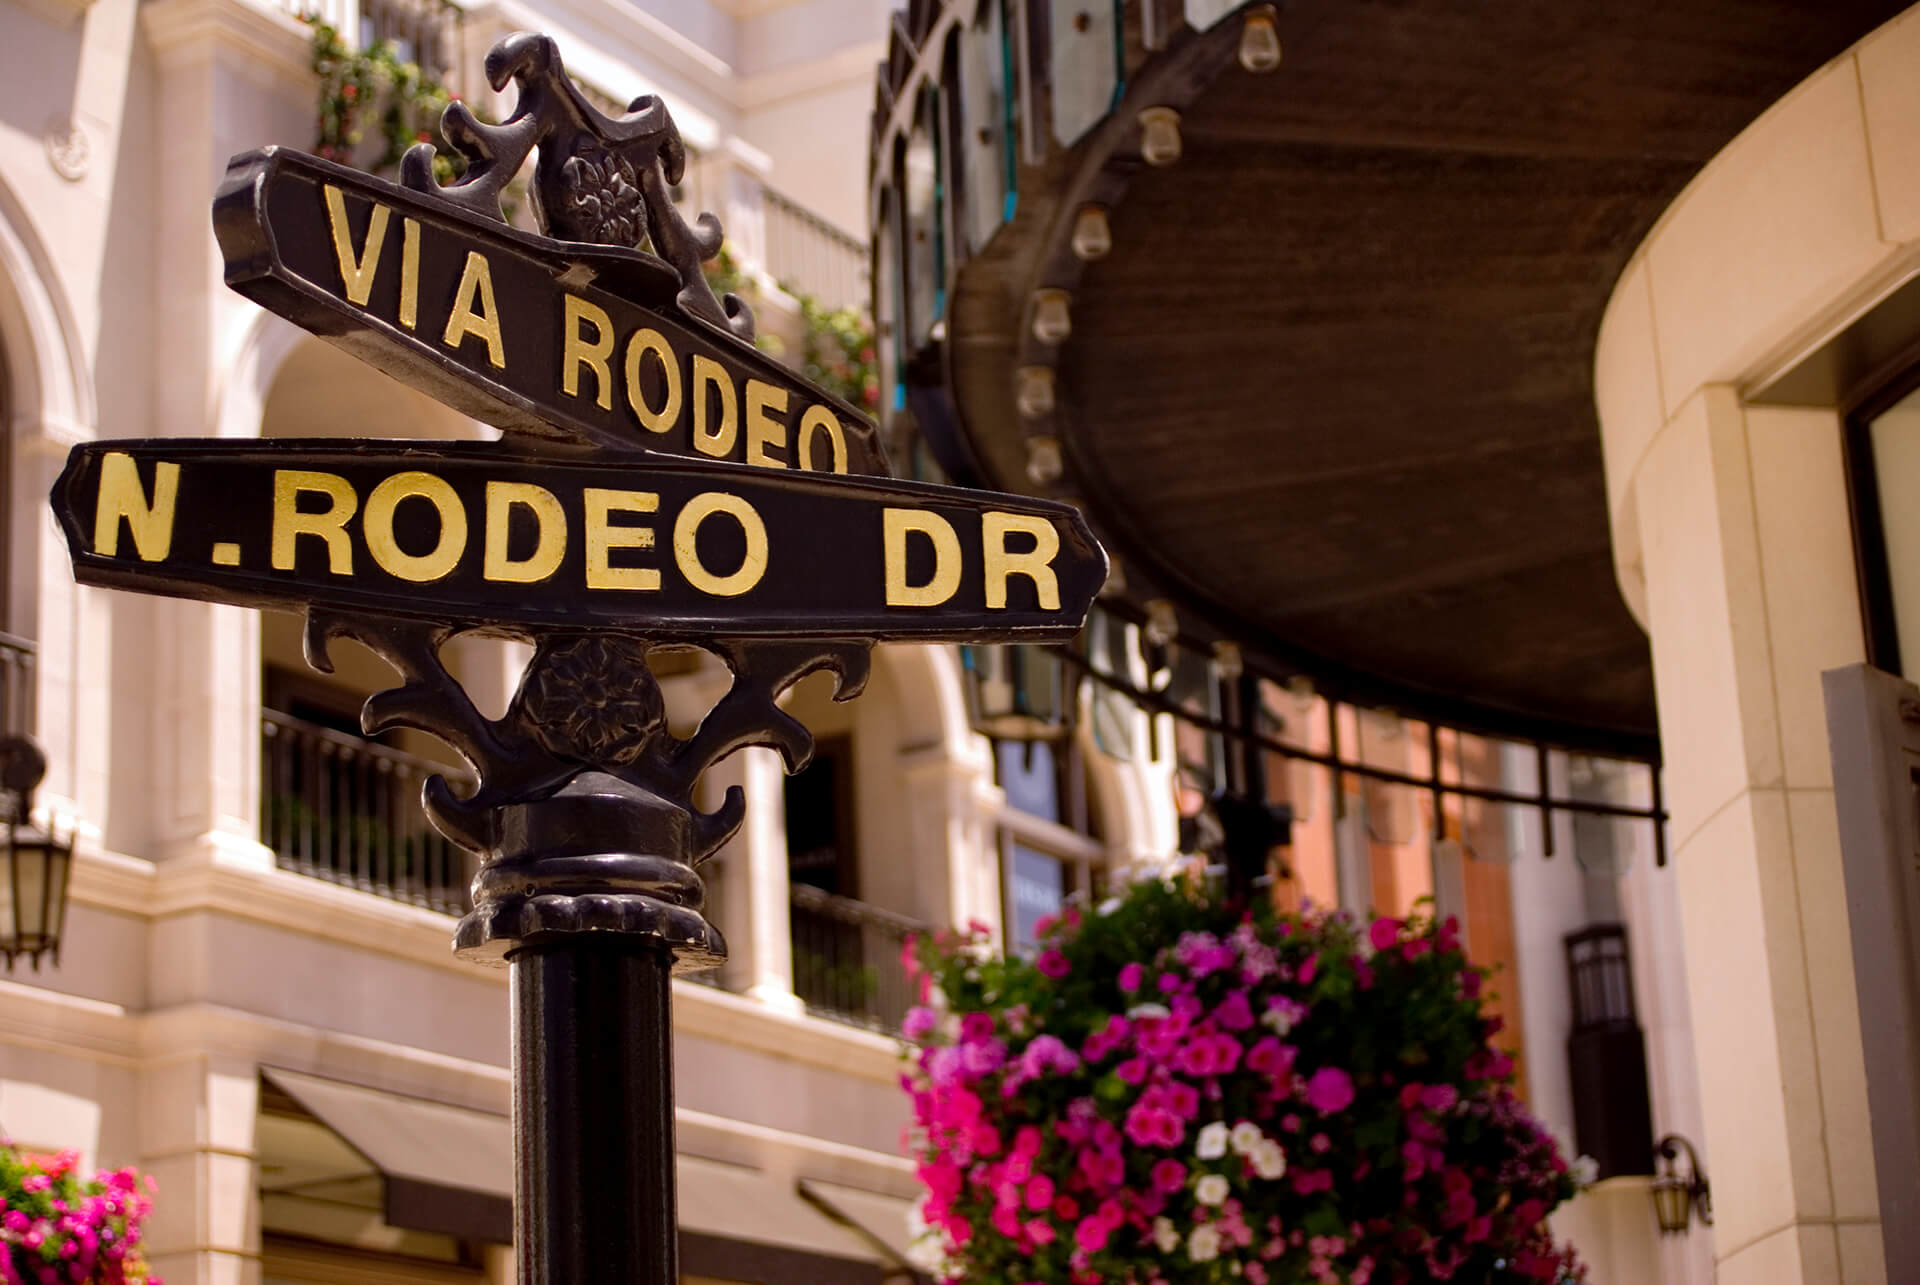 N Rodeo Dr. Street Sign